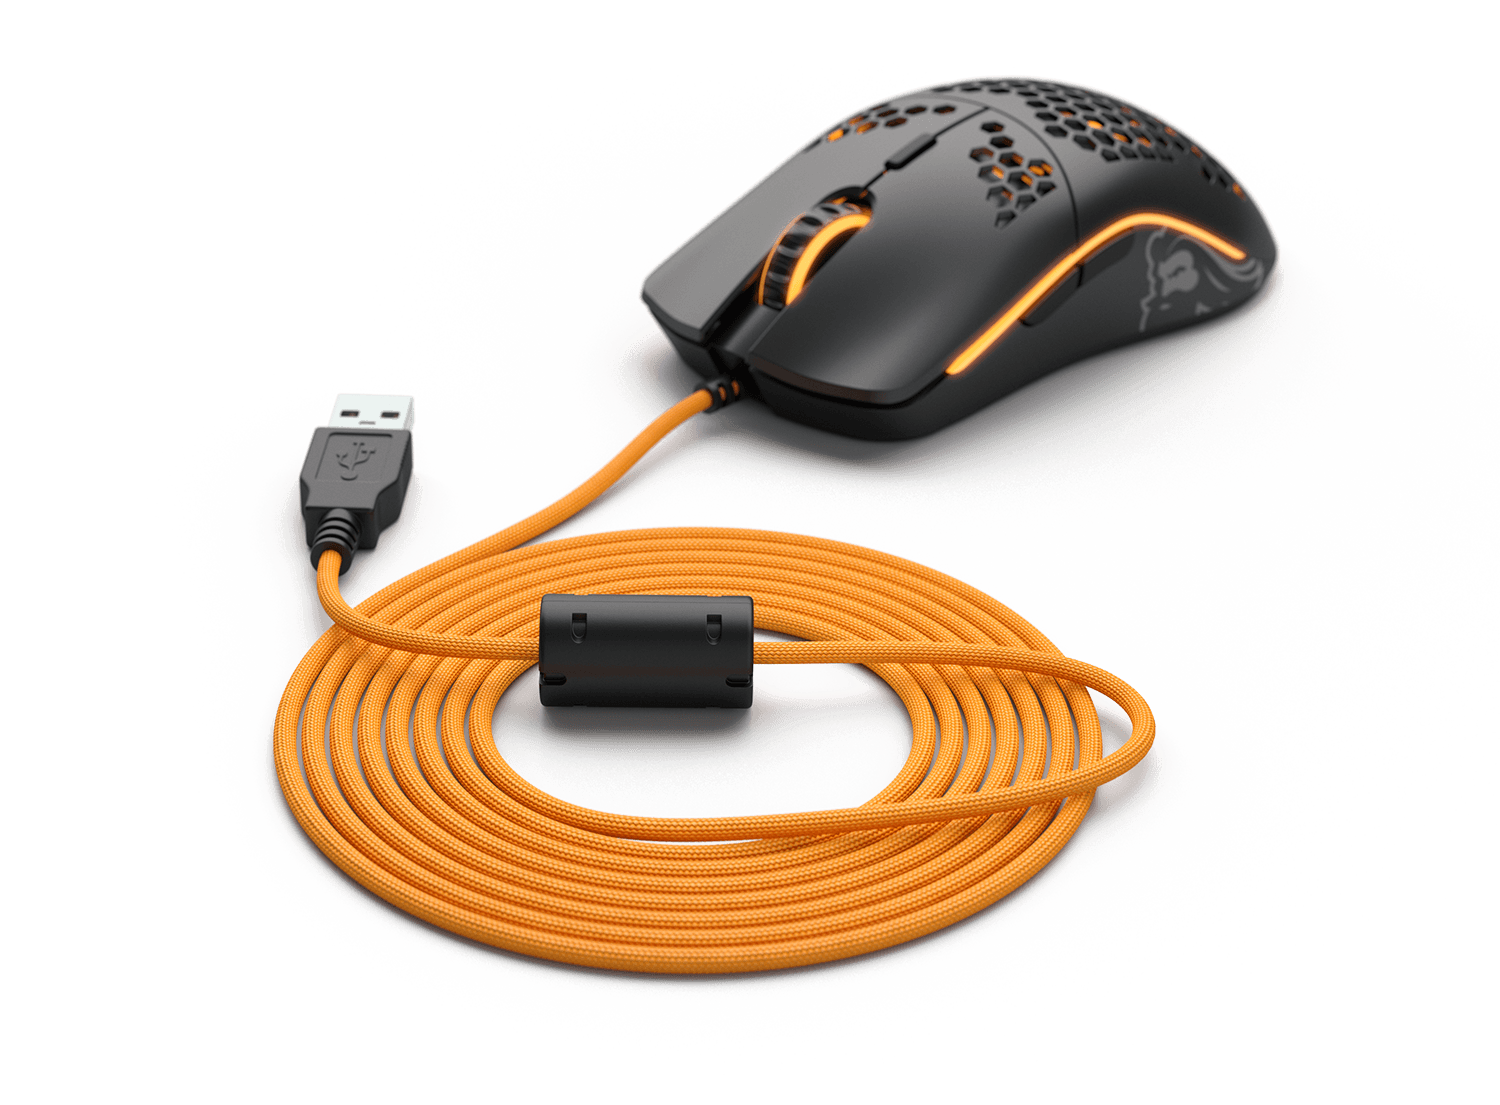 Glorious Ascended Cable (Gold) - Flexible Lightweight Paracord - Gaming Mouse Replacement Cable Repair Accessory